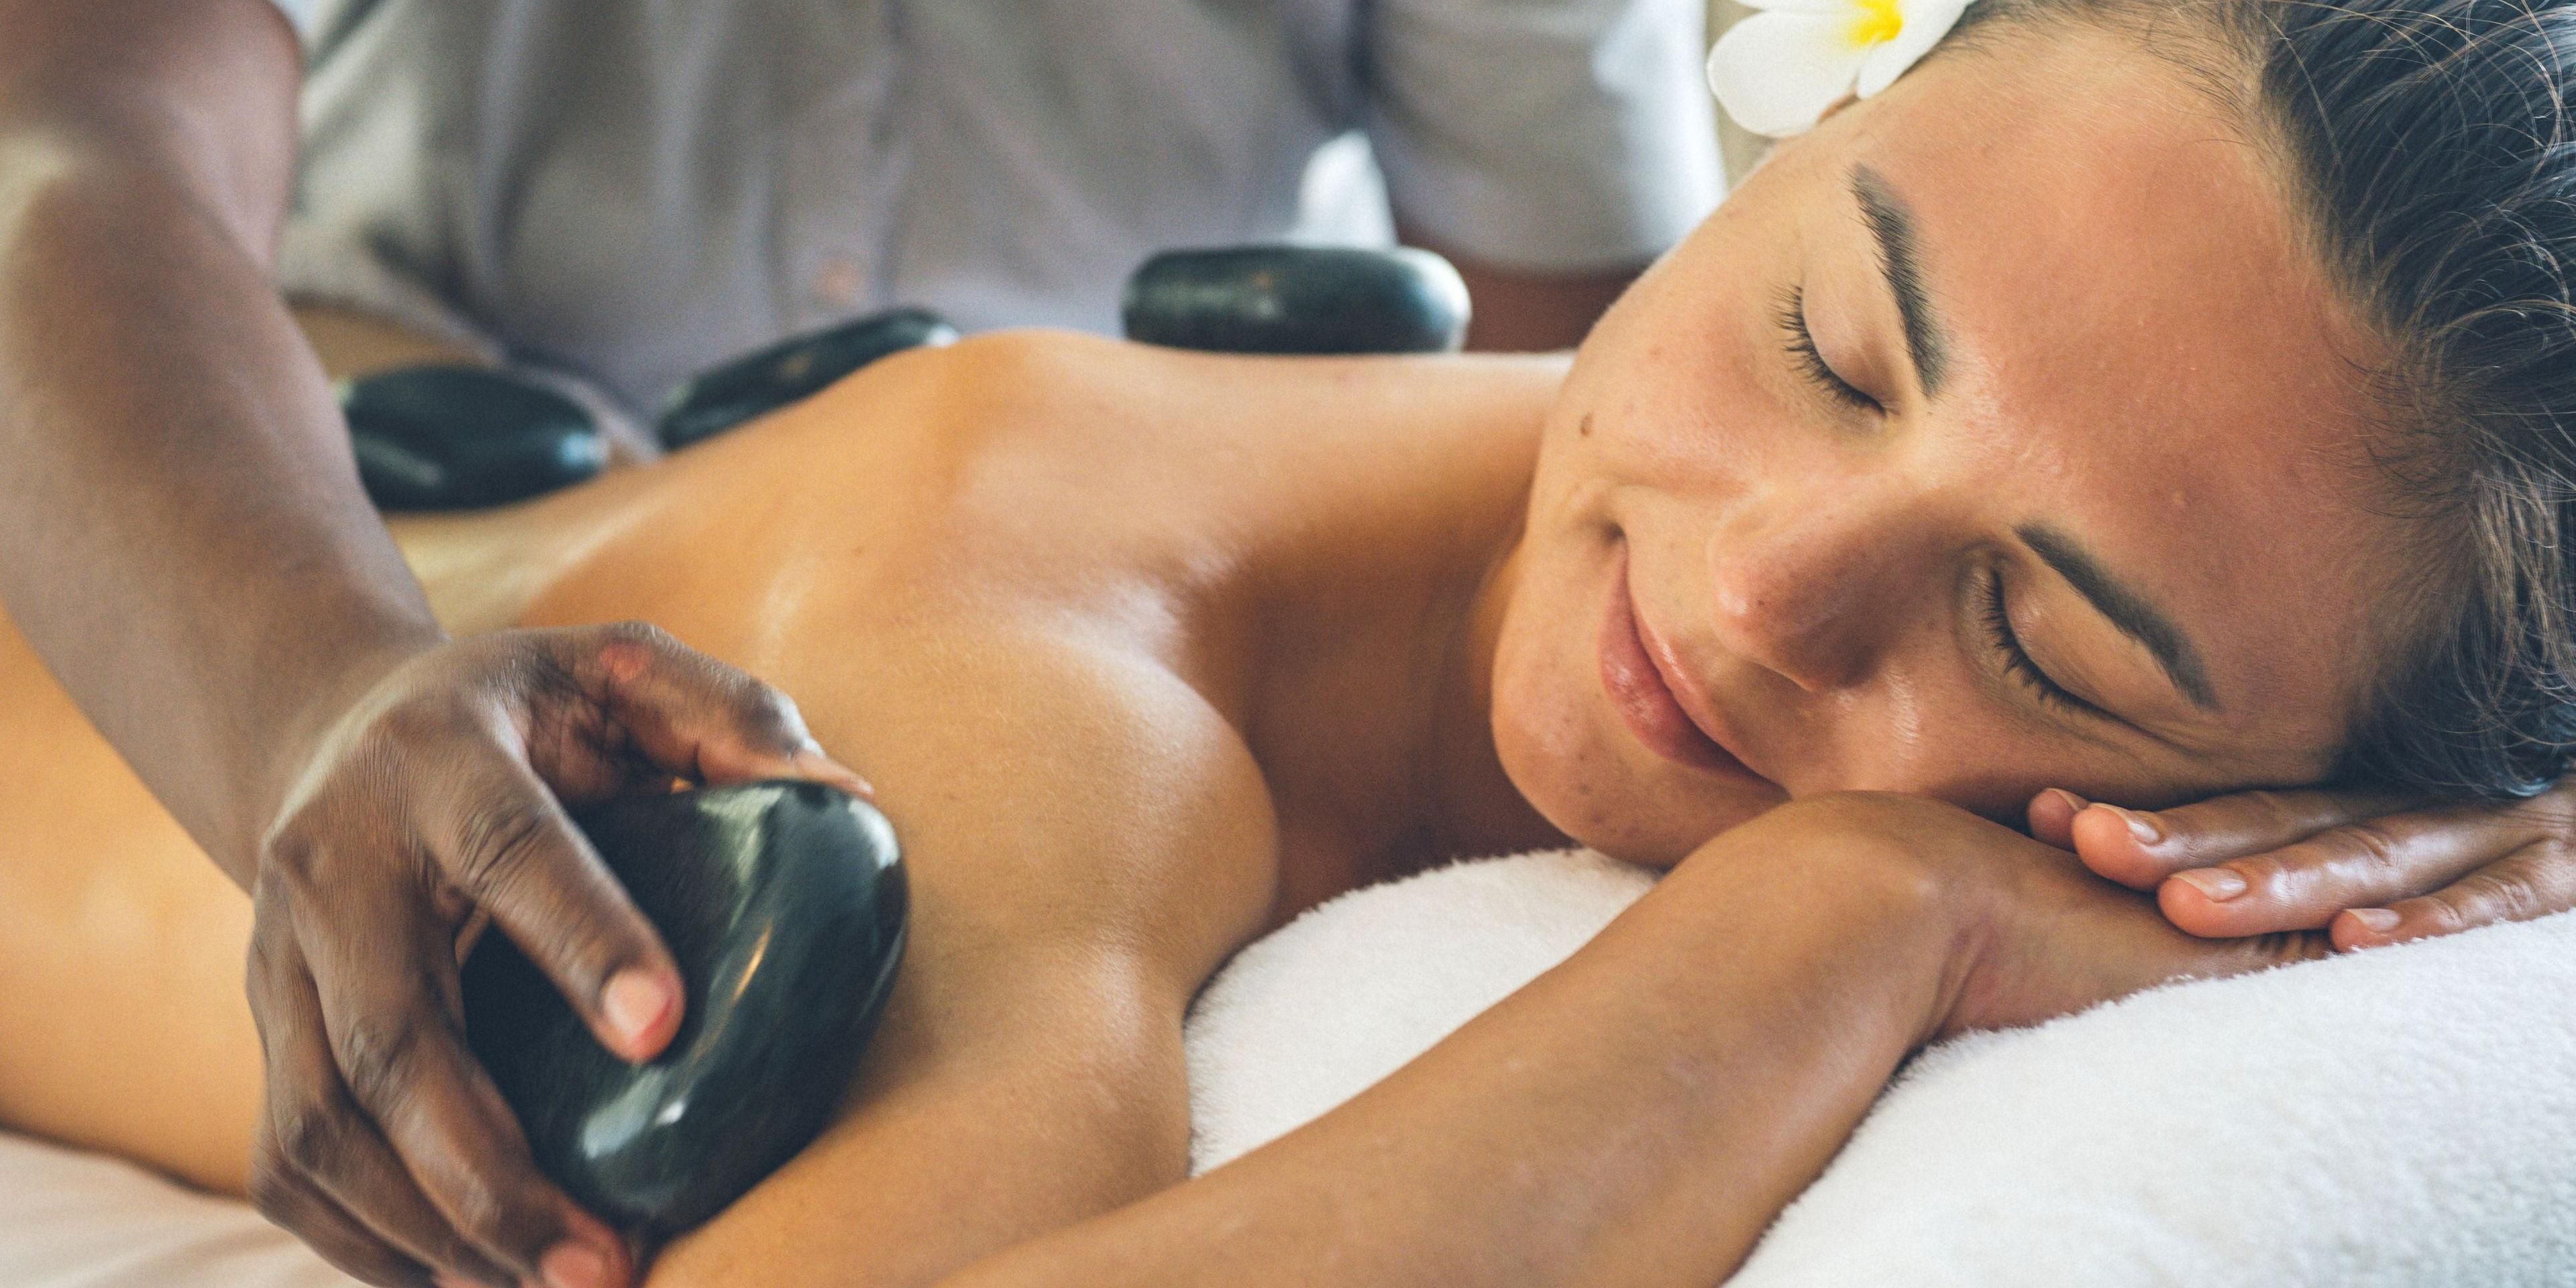 Indulge in Spa InterContinental, an award-winning haven for relaxation. Our Fiji resort offers Eastern and Western treatments, infused with local herbs and honey to restore balance. With skilled therapists and a range of spa experiences, our spa offers an escape to serenity and rejuvenation.